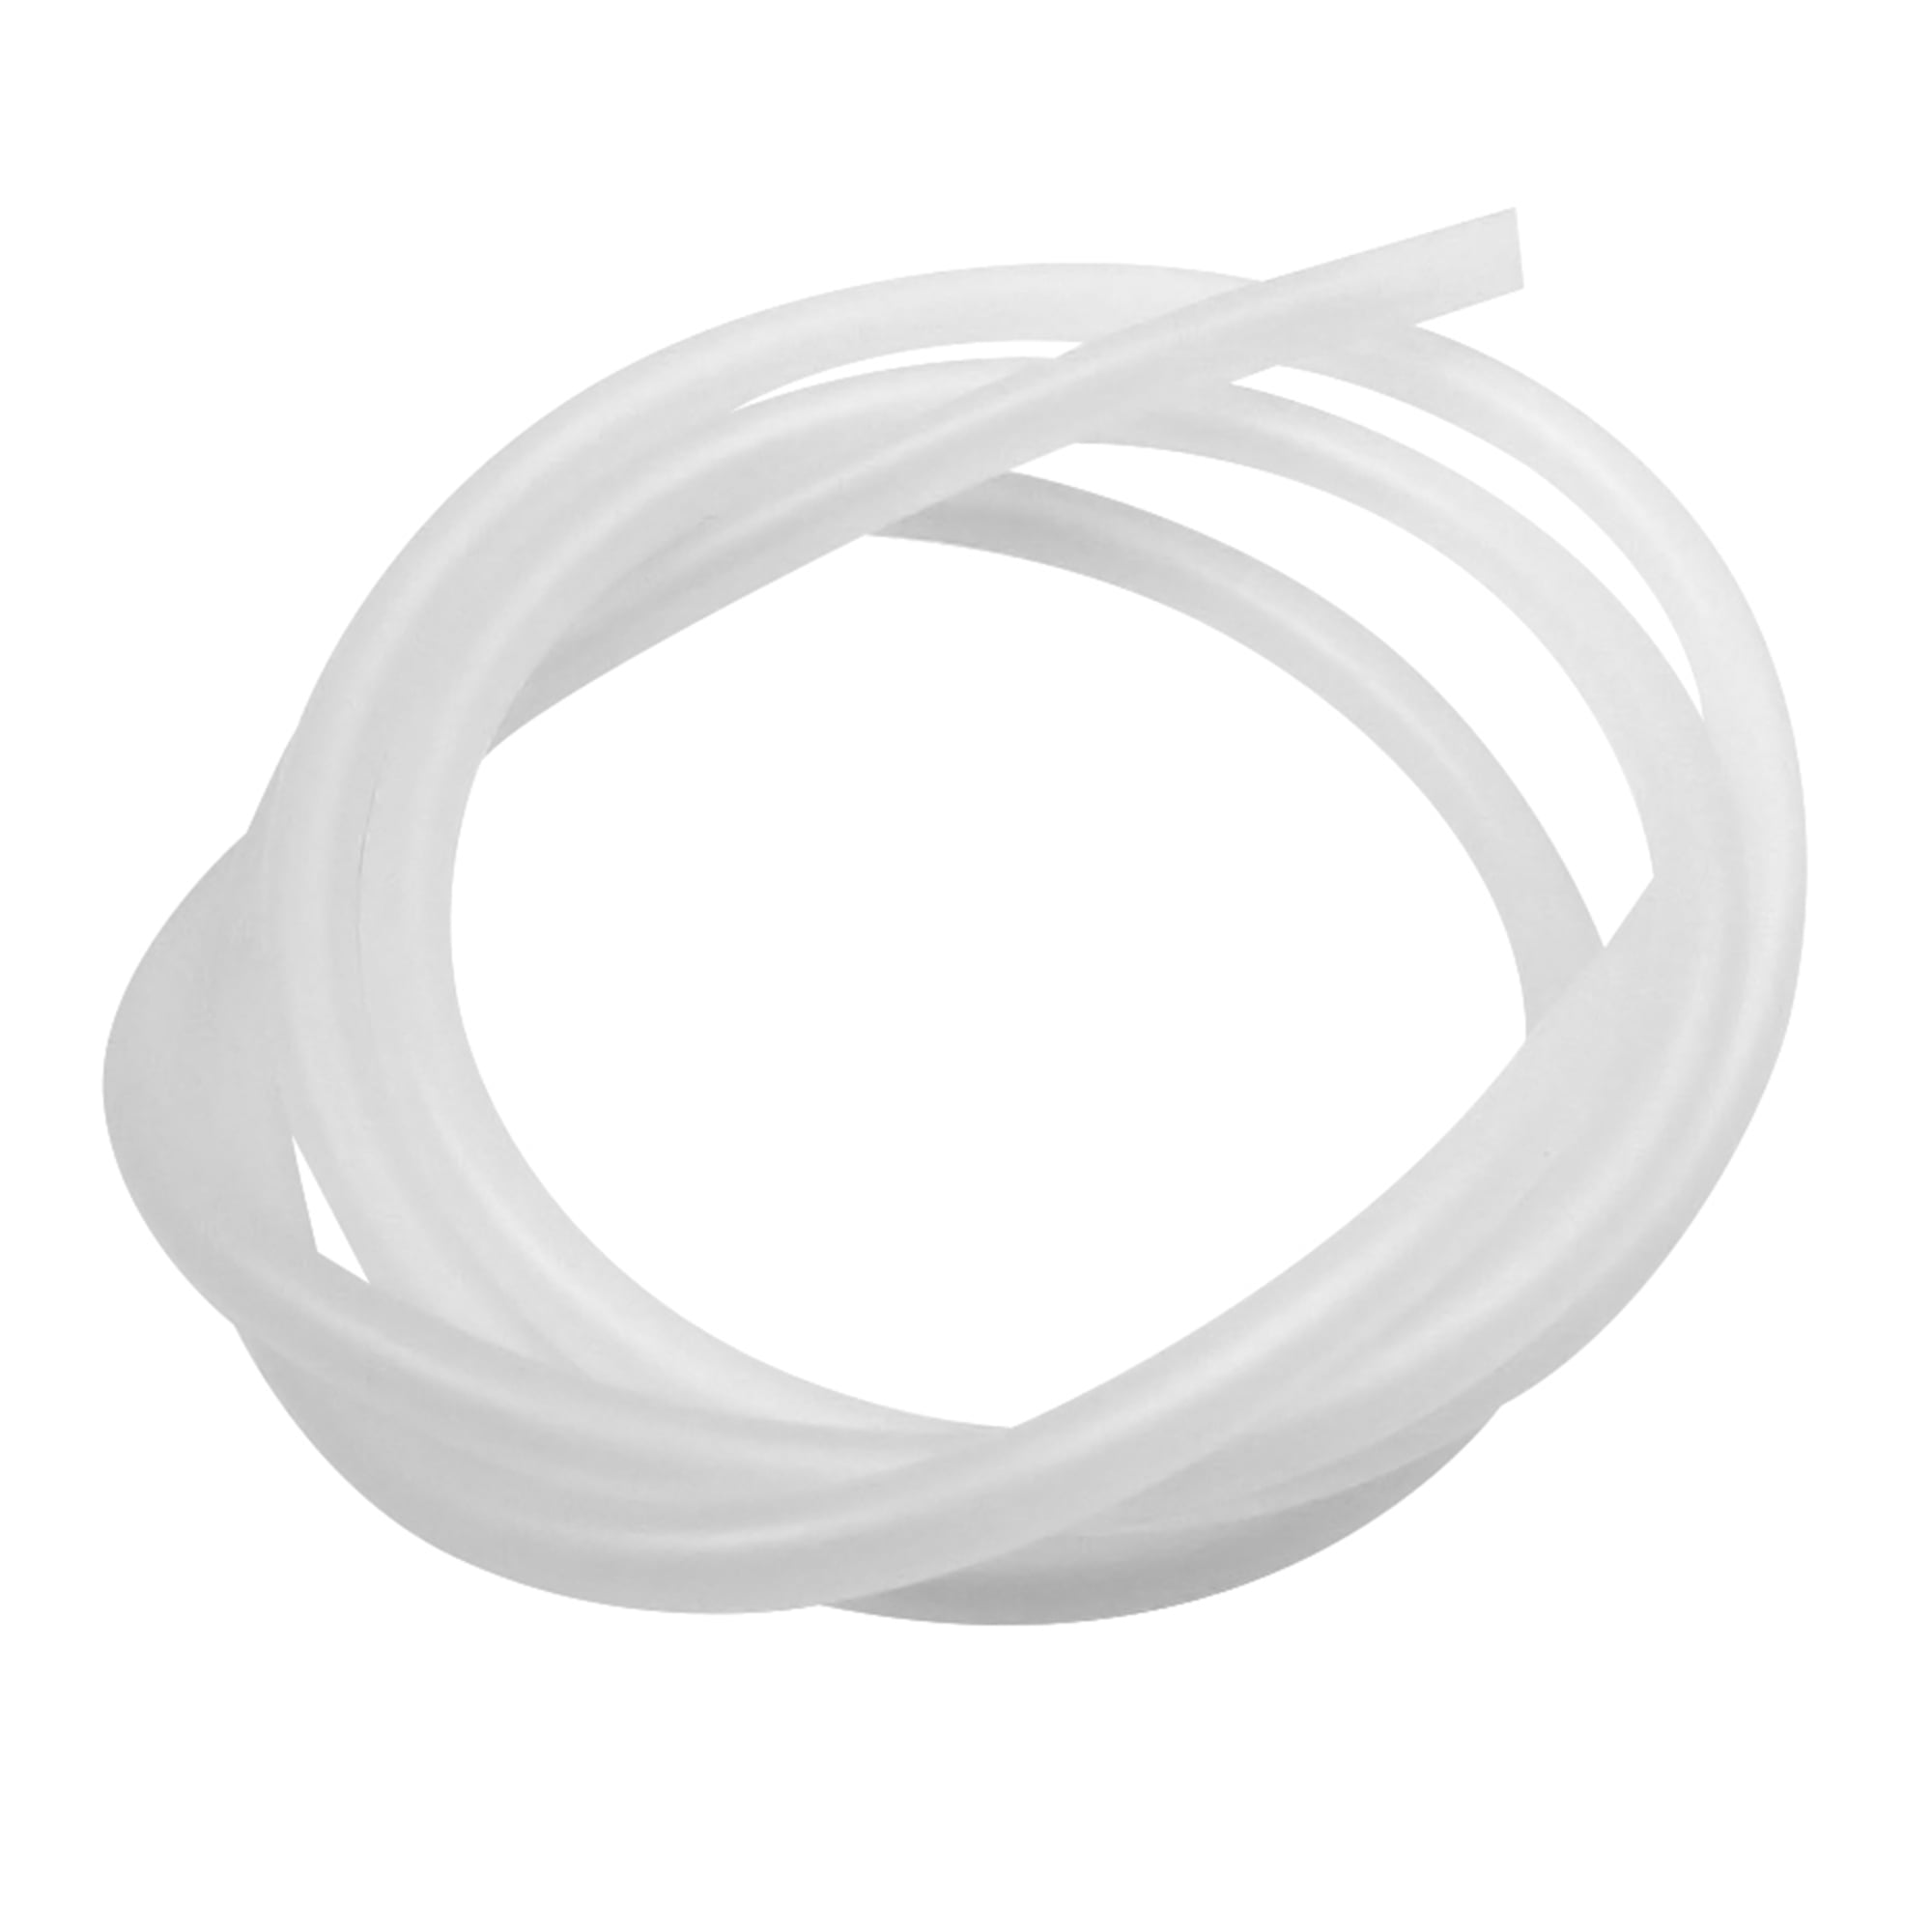 PVC Clear Tubing 3/16"ID x 5/16"OD Food/Beverage Price is for 3 ft 